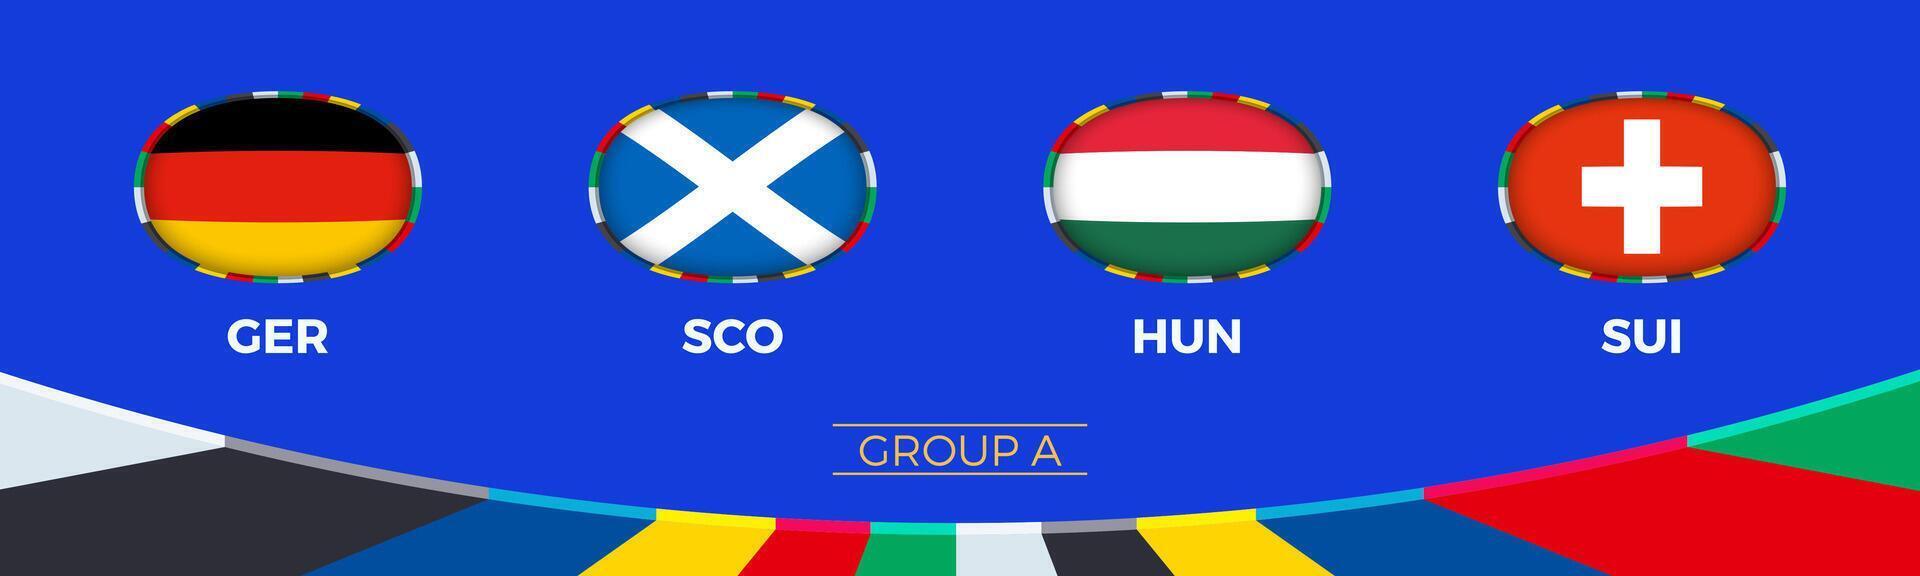 Football 2024 Group A participants of European soccer tournament, national flags stylized in tournament style. vector